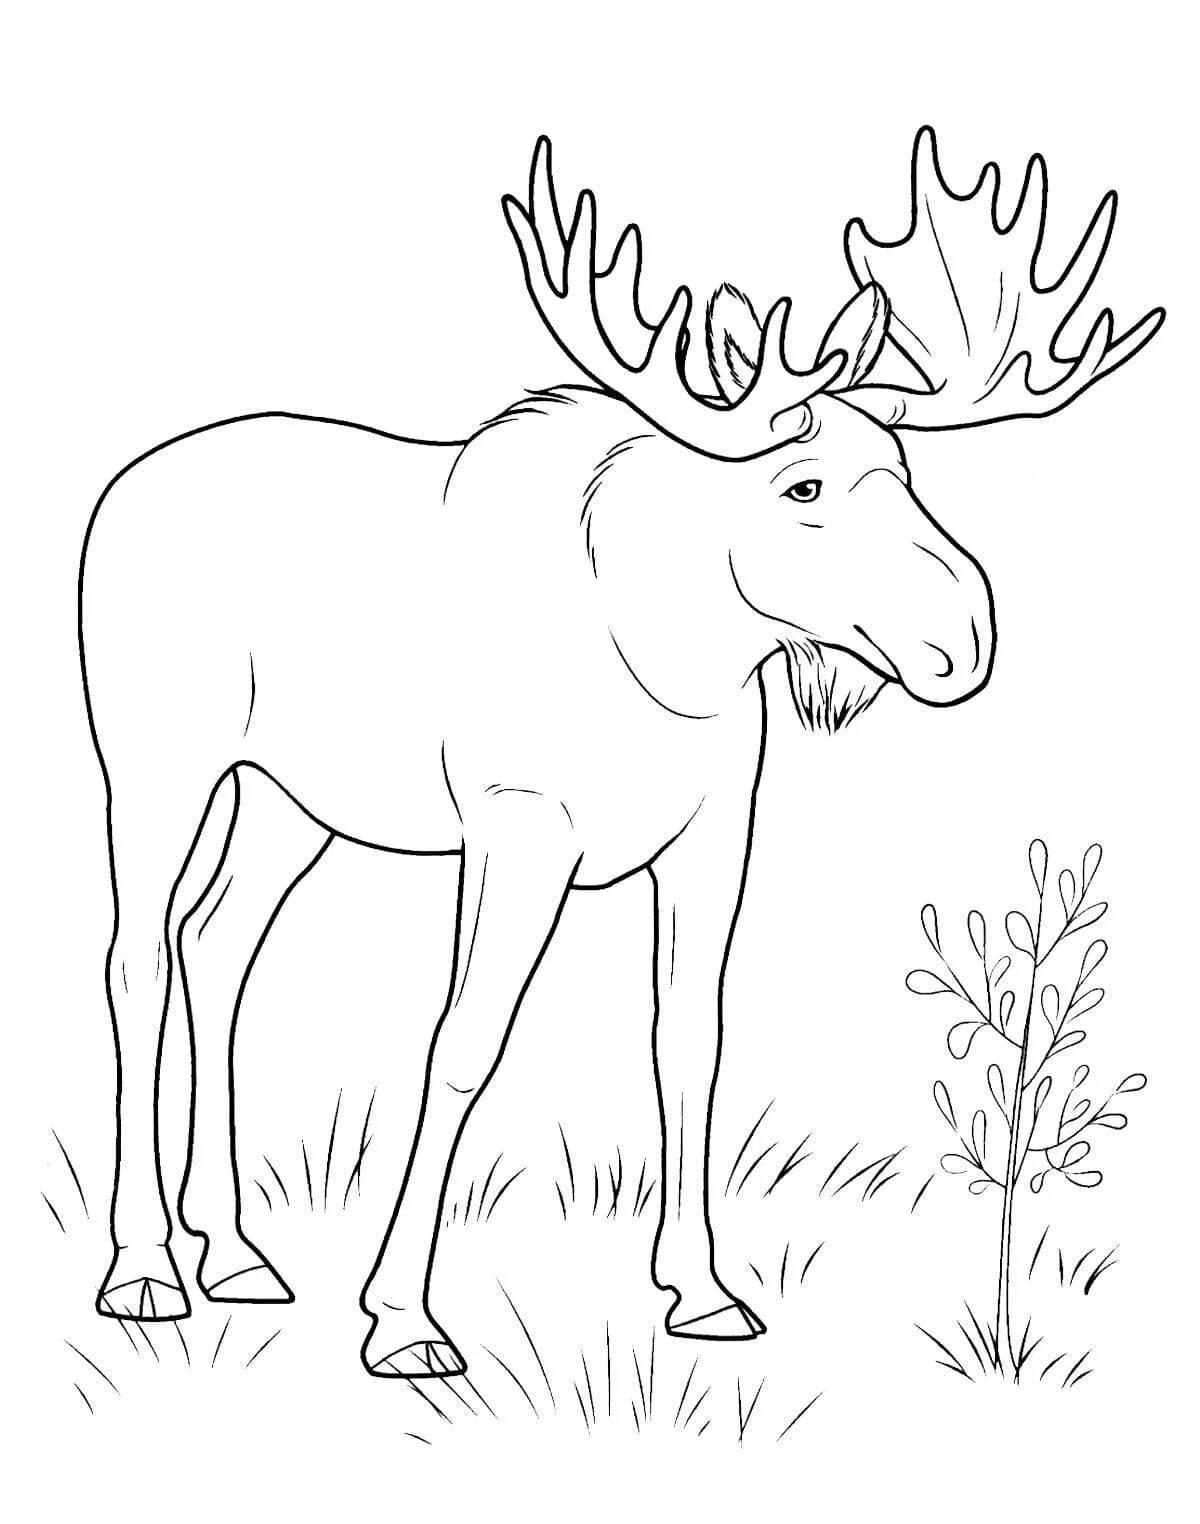 Gorgeous Russian animals coloring pages for kids